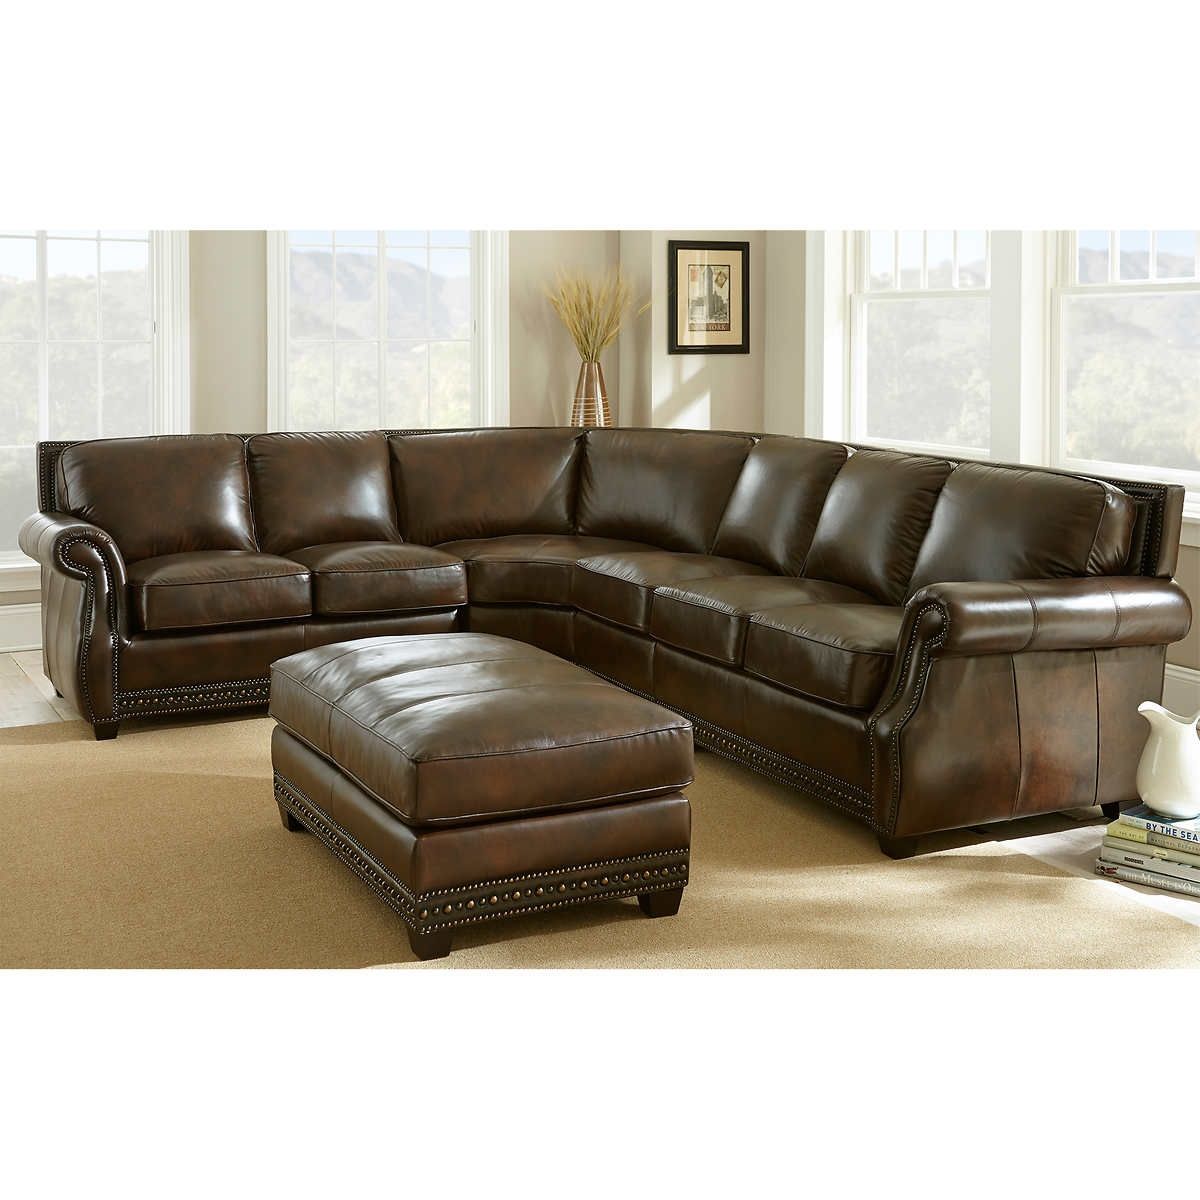 Broyhill Sectional Sofas On Sale Tags 49 Dreaded Broyhill With Regard To Broyhill Sectional Sofas (Photo 12 of 12)